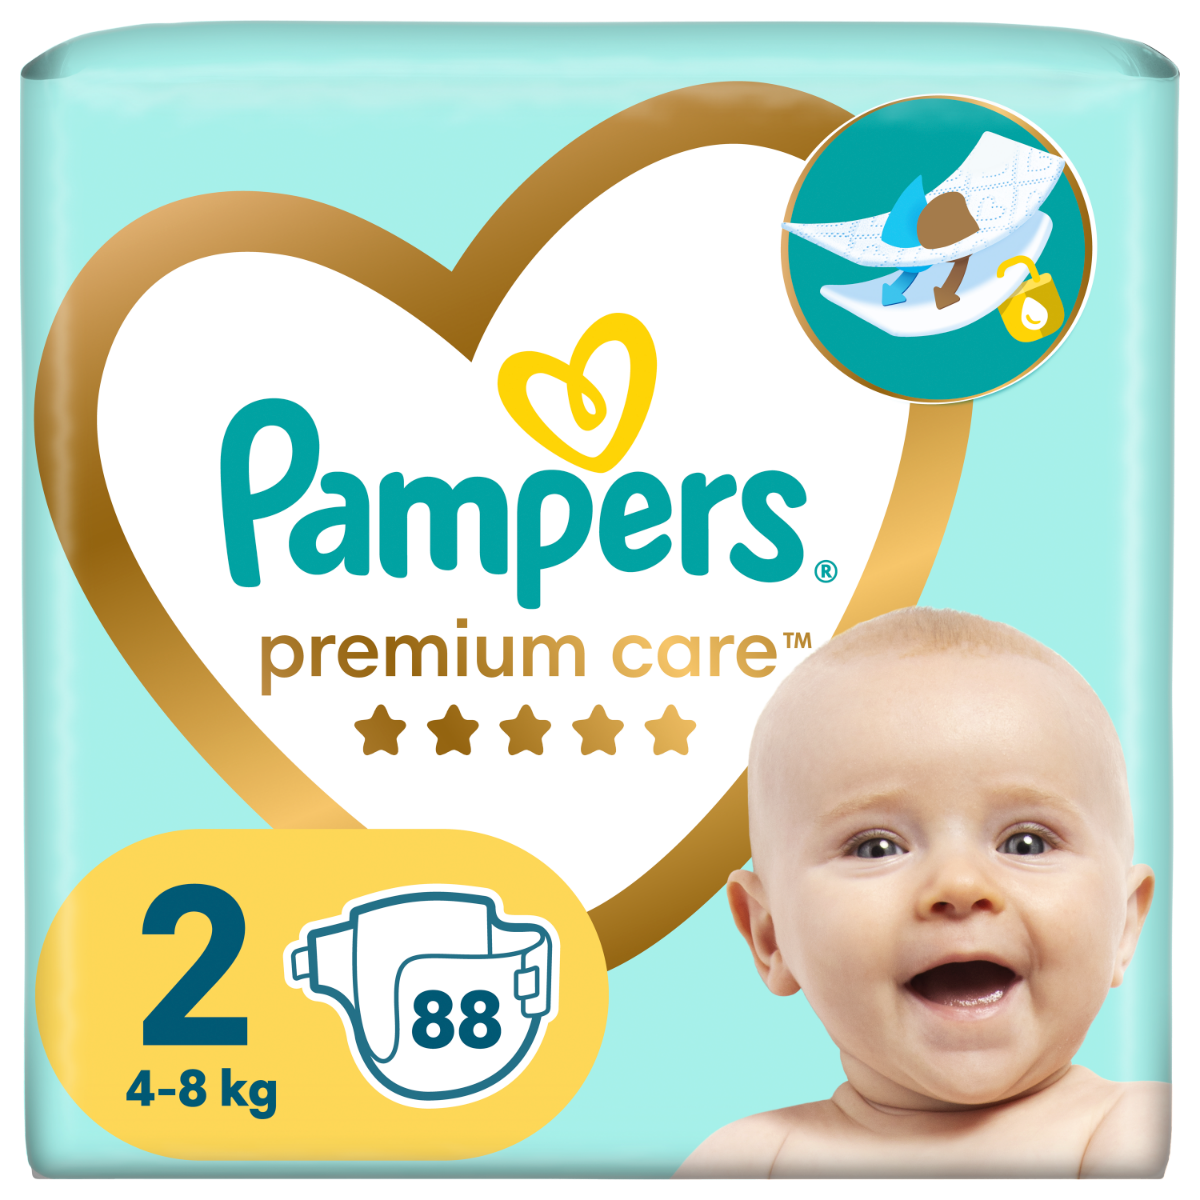 pampers baby dry 6